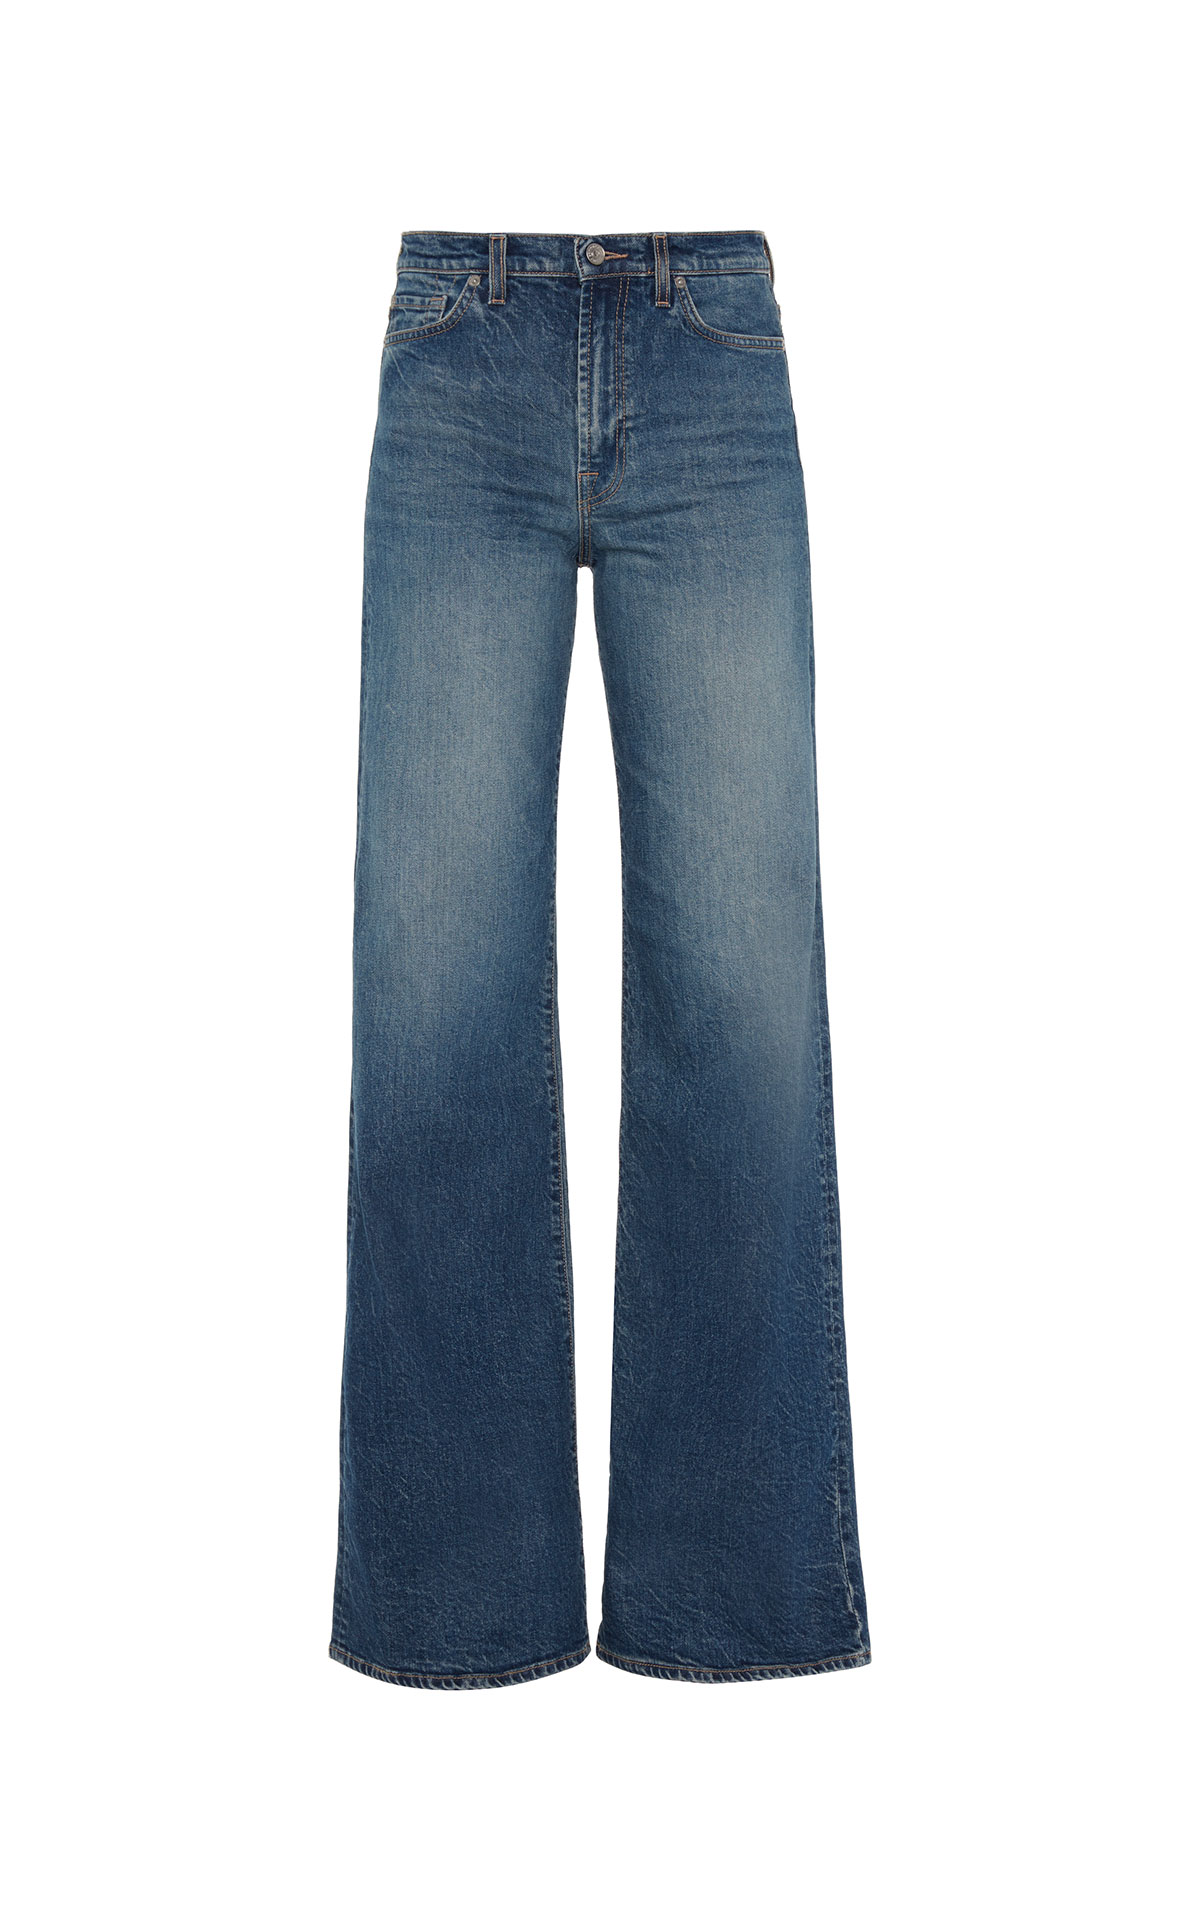 7 For All Mankind Trouser indigo from Bicester Village